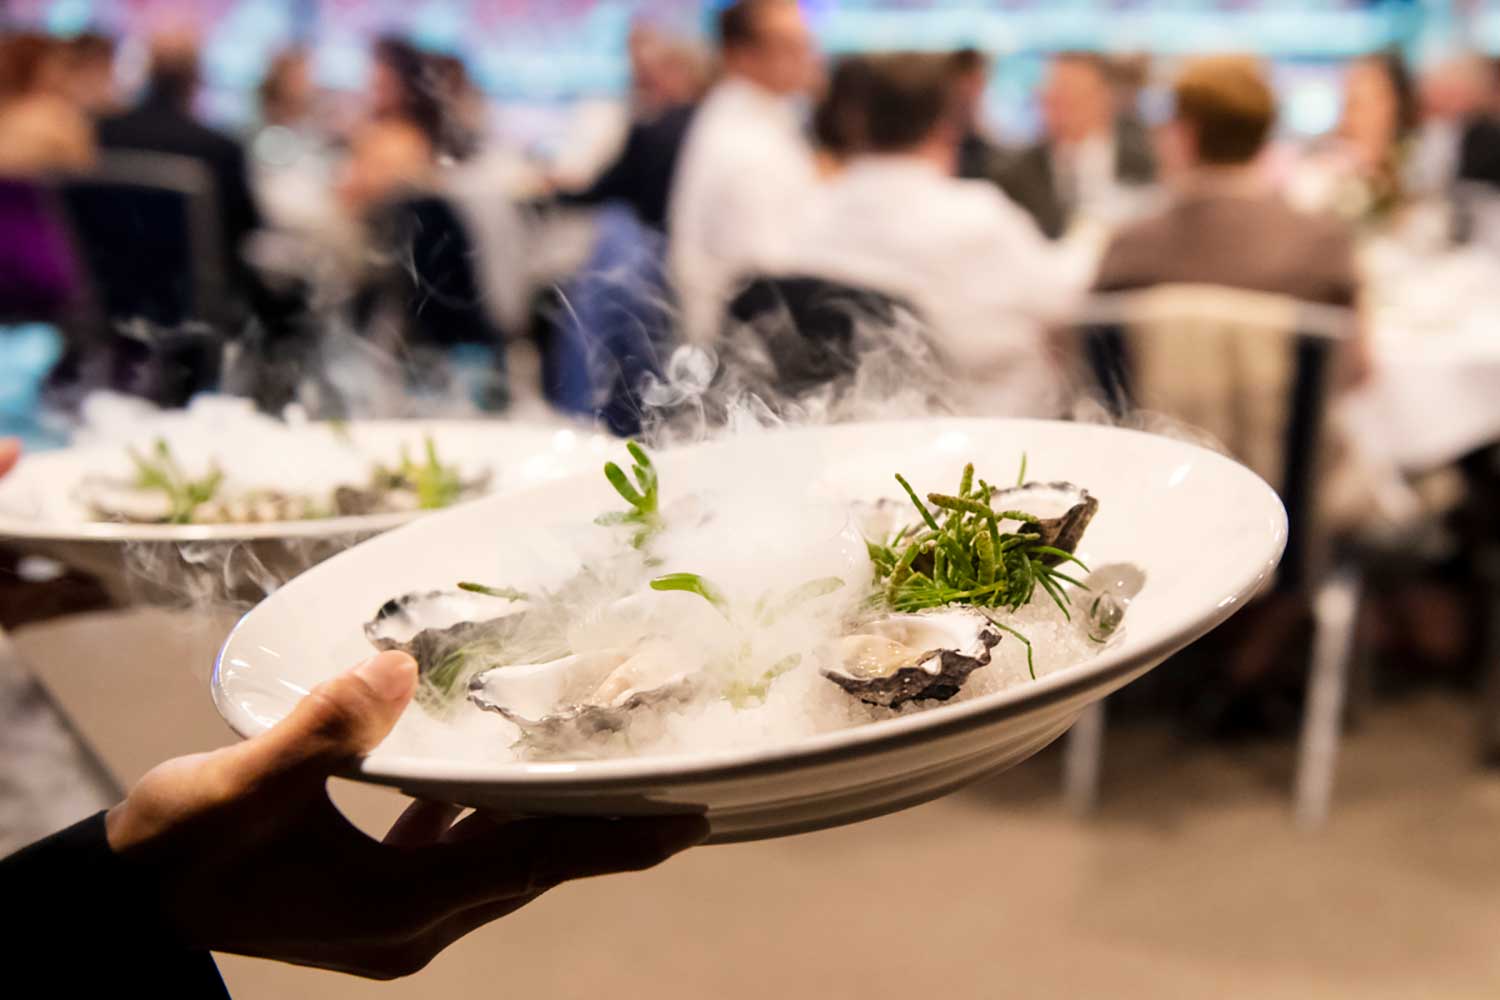 Tathra Oysters, served natural with coastal herbs: samphire and beach bananas at Wednesday evening's awards presentation dinner.